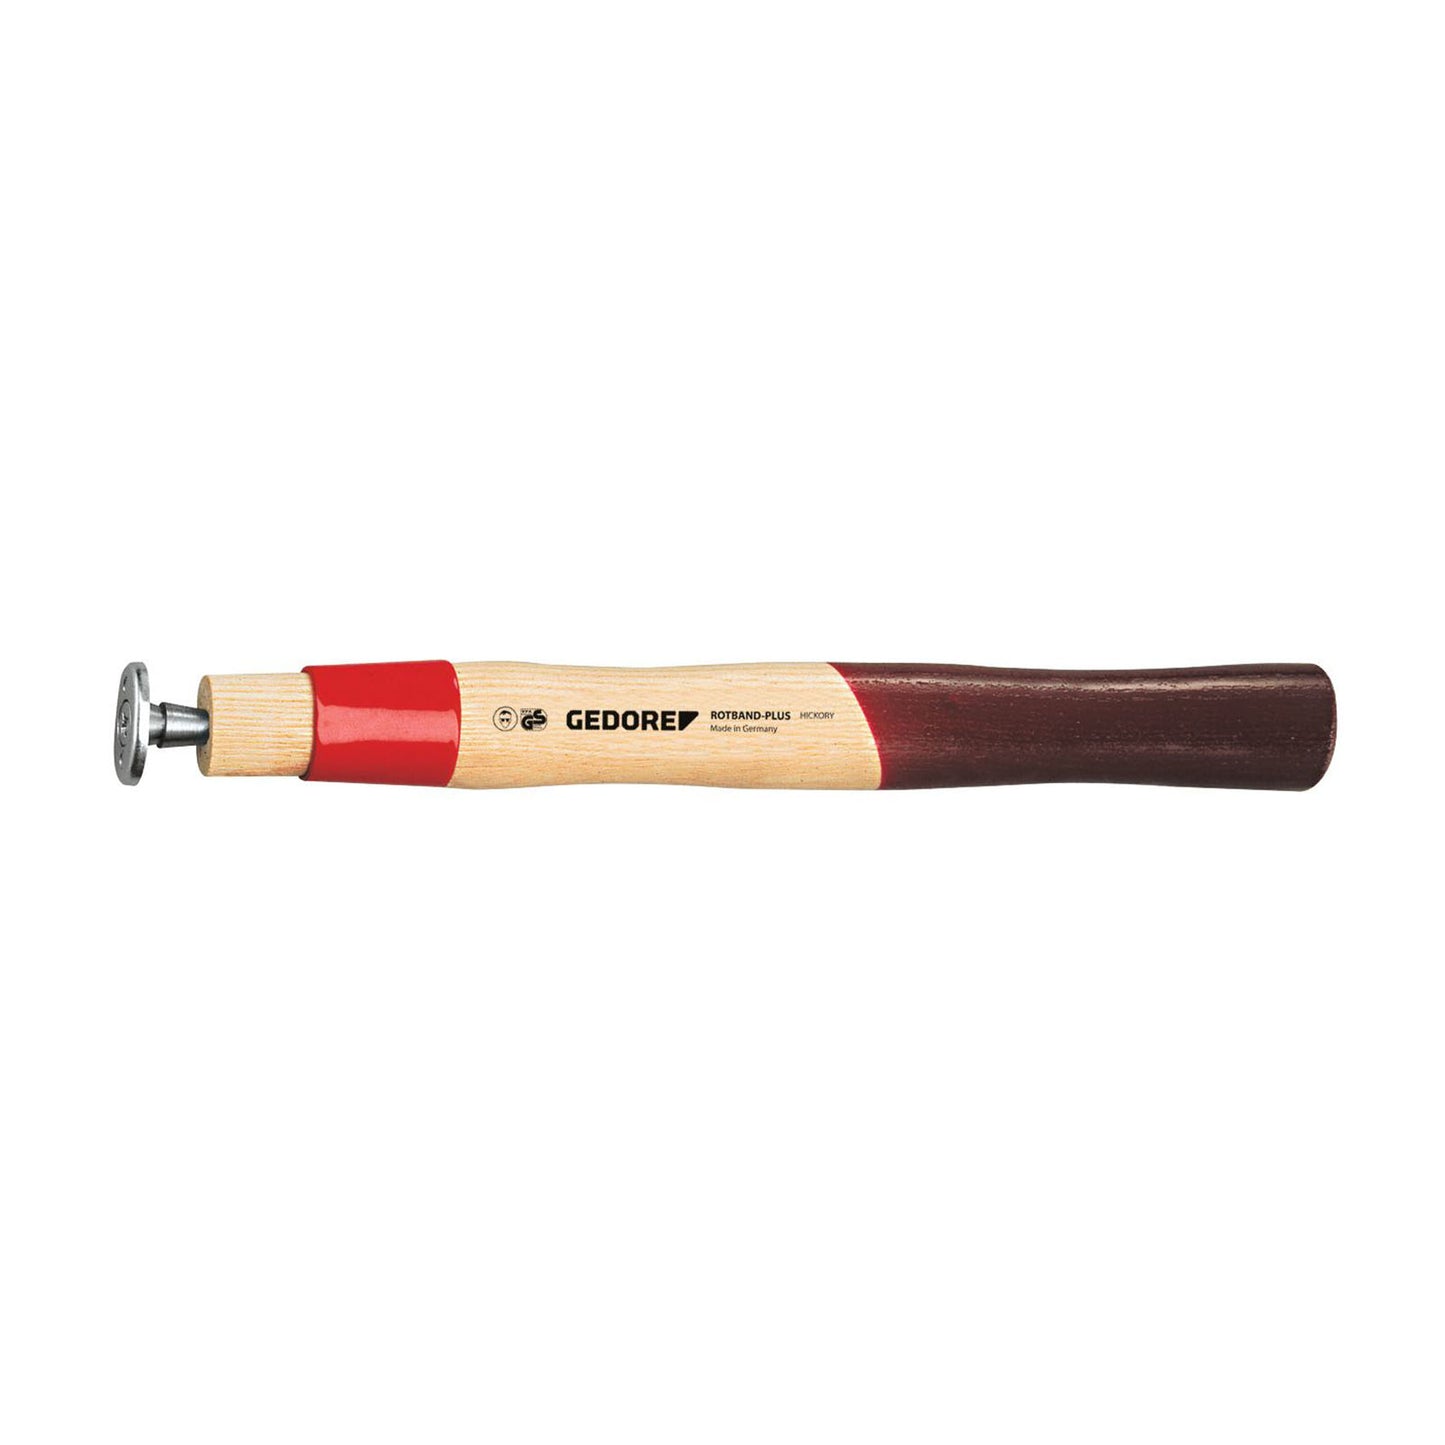 GEDORE E-609 H-6 - Walnut replacement handle 80cm (8740350)